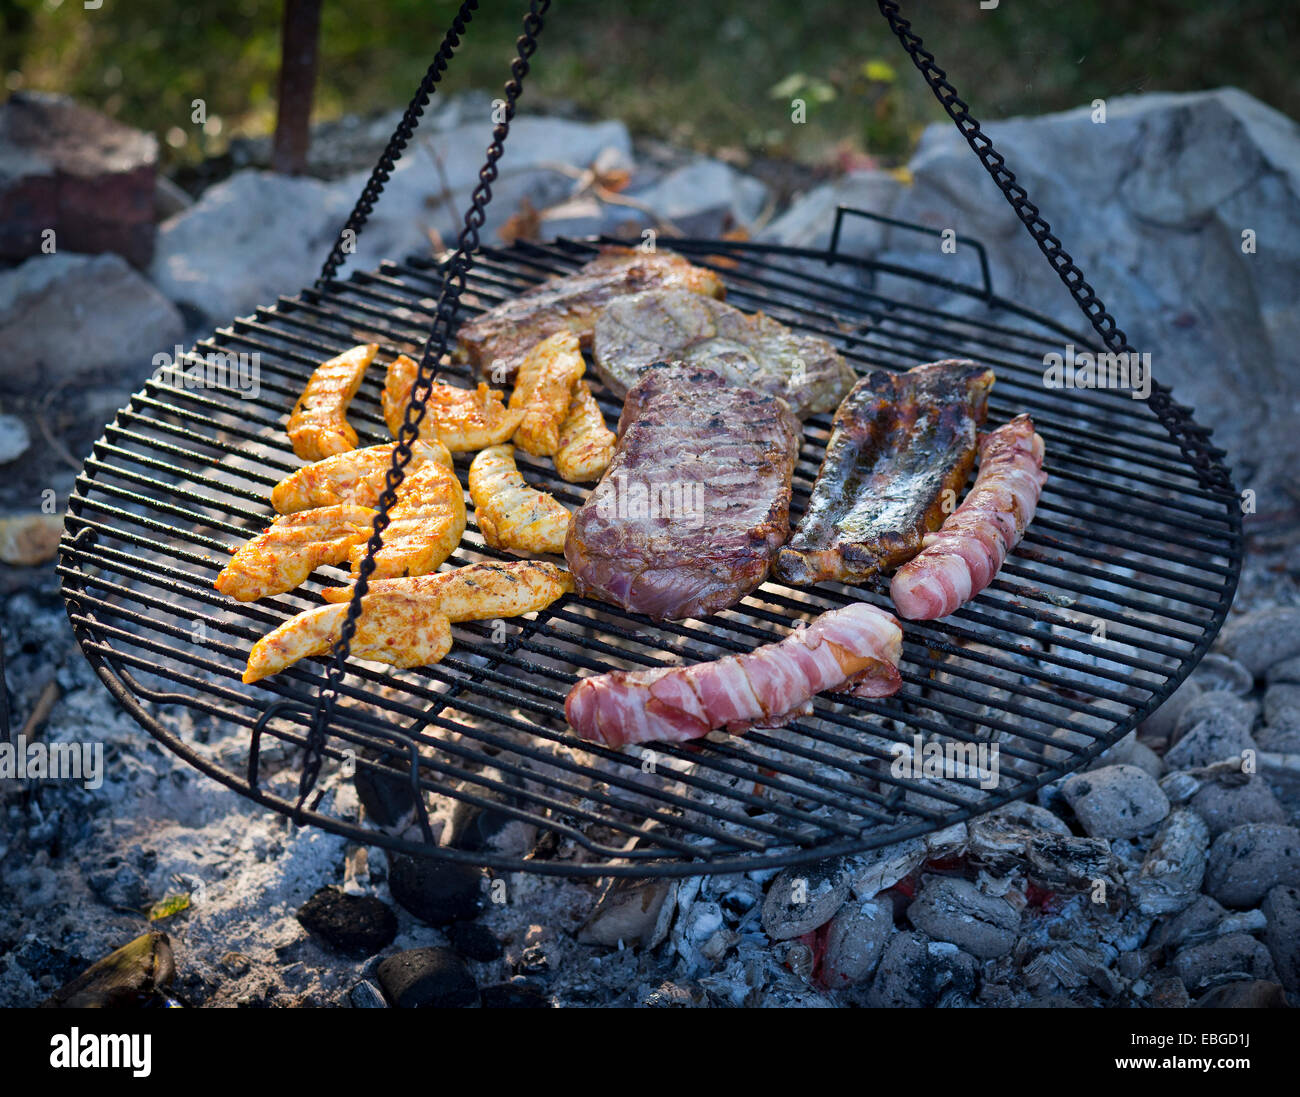 Meat and sausages being cooked on a grill hanging on chains Stock Photo